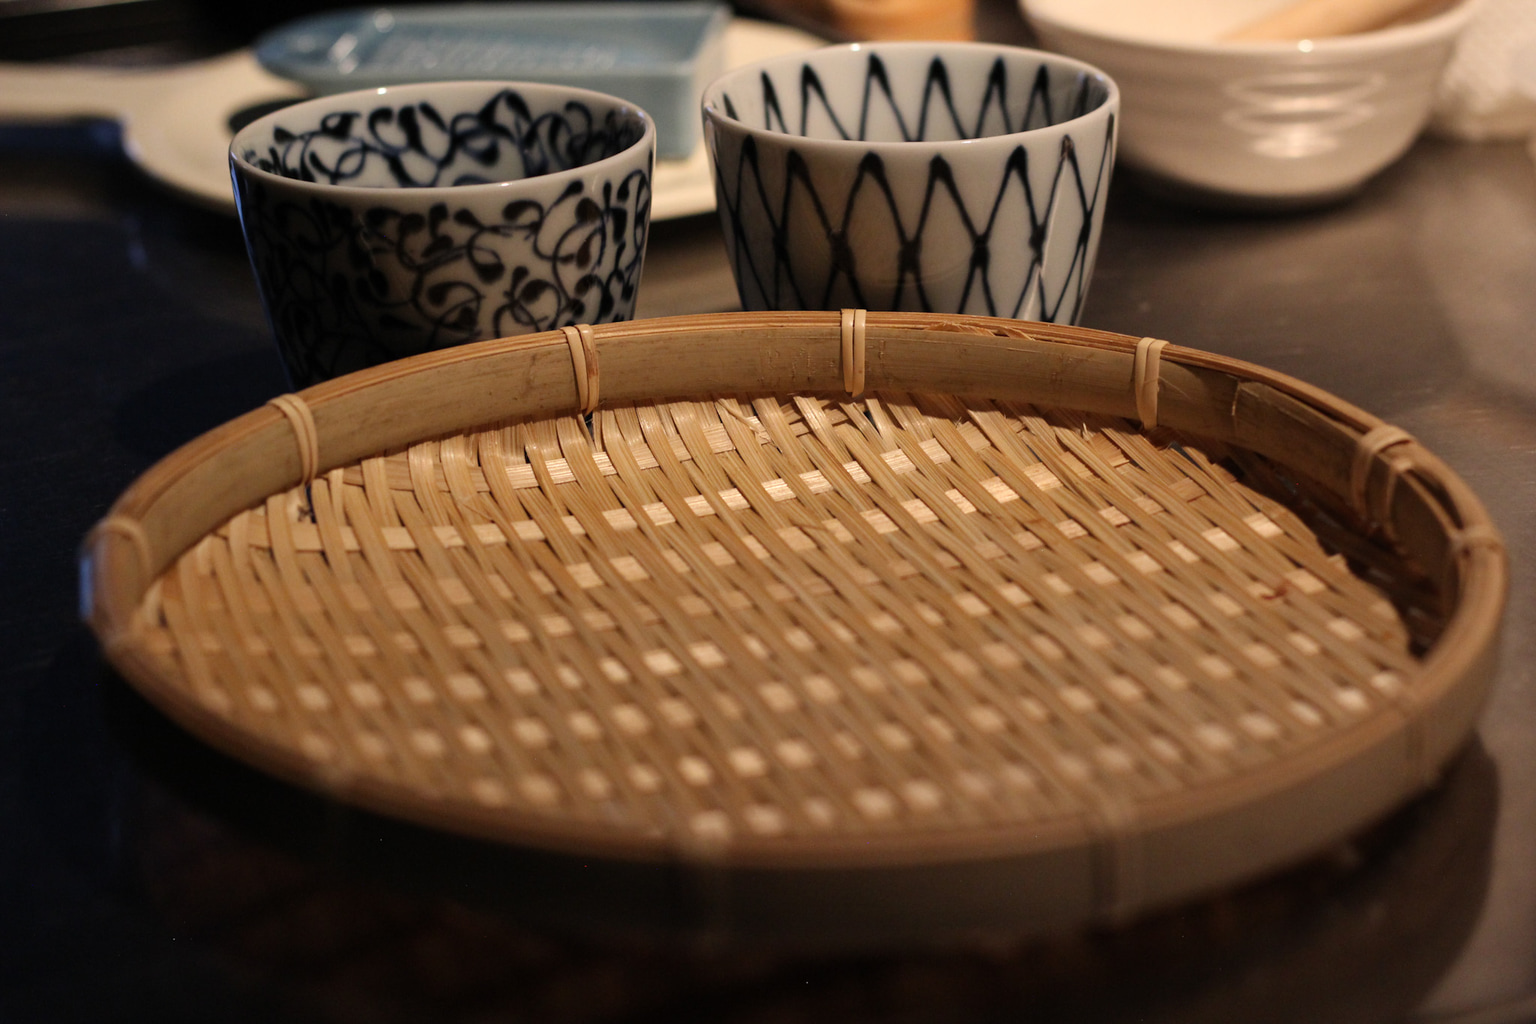 Japanese Cooking Utensils and Serving Dishes